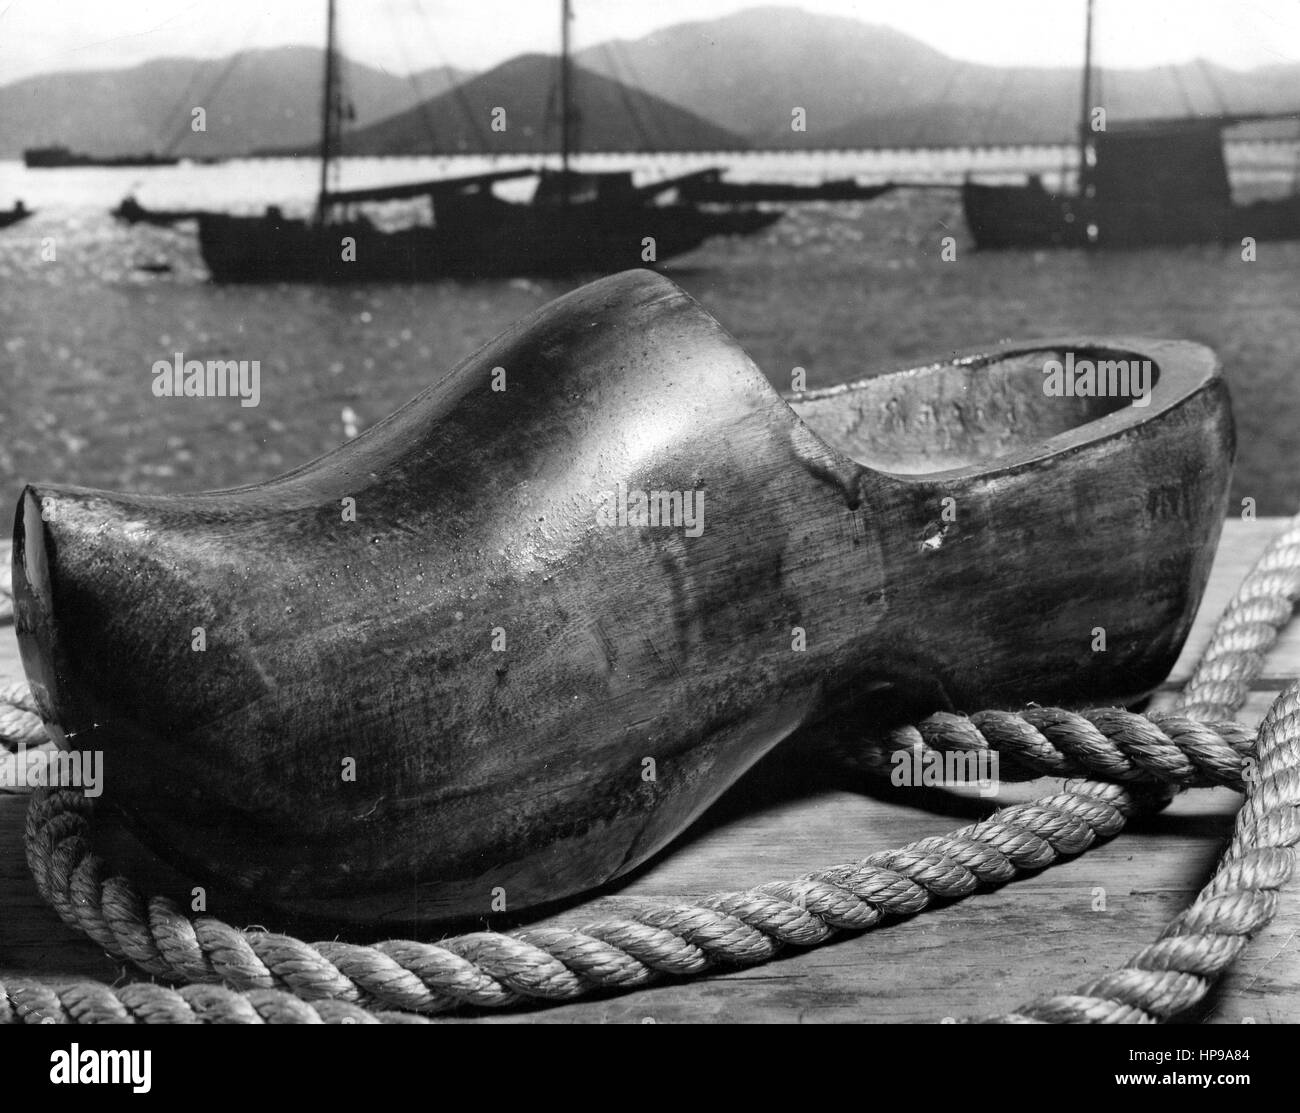 Wooden shoe on a boat dock. Stock Photo